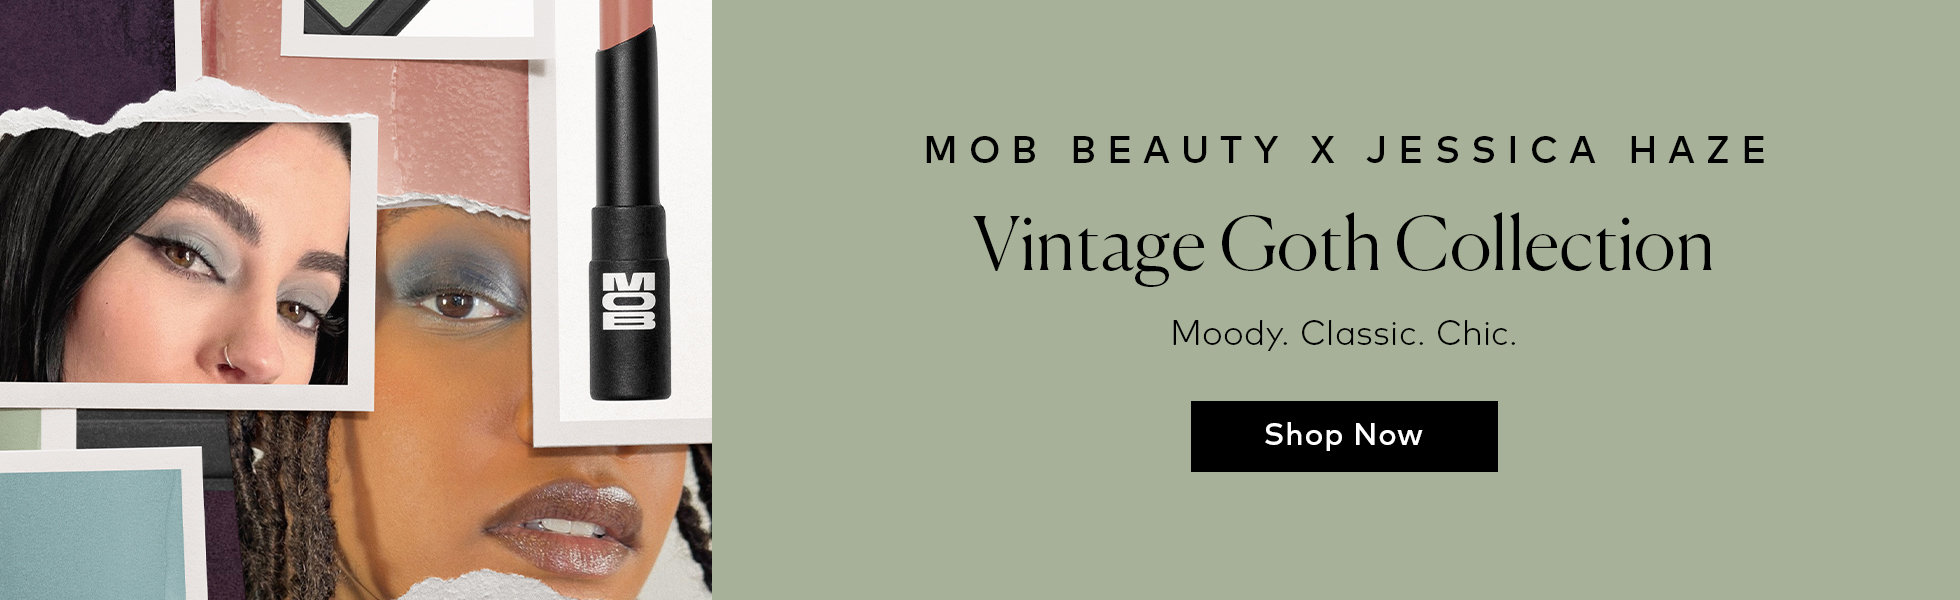 Shop the MOB Beauty x Jessica Haze Vintage Goth Collection